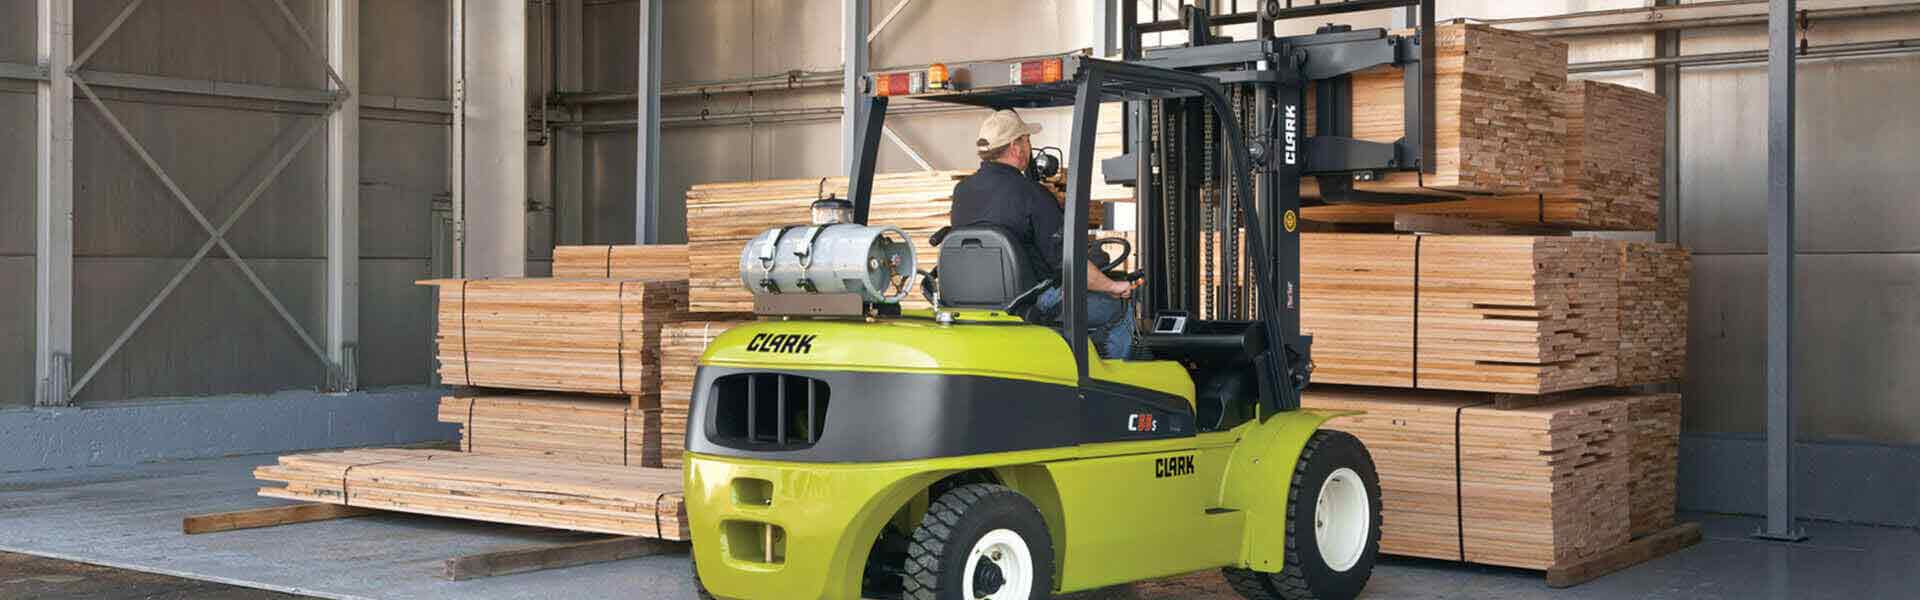 Affordable Forklift Services Forklift Company Nj Ny Eastern Pa C C Lift Truck